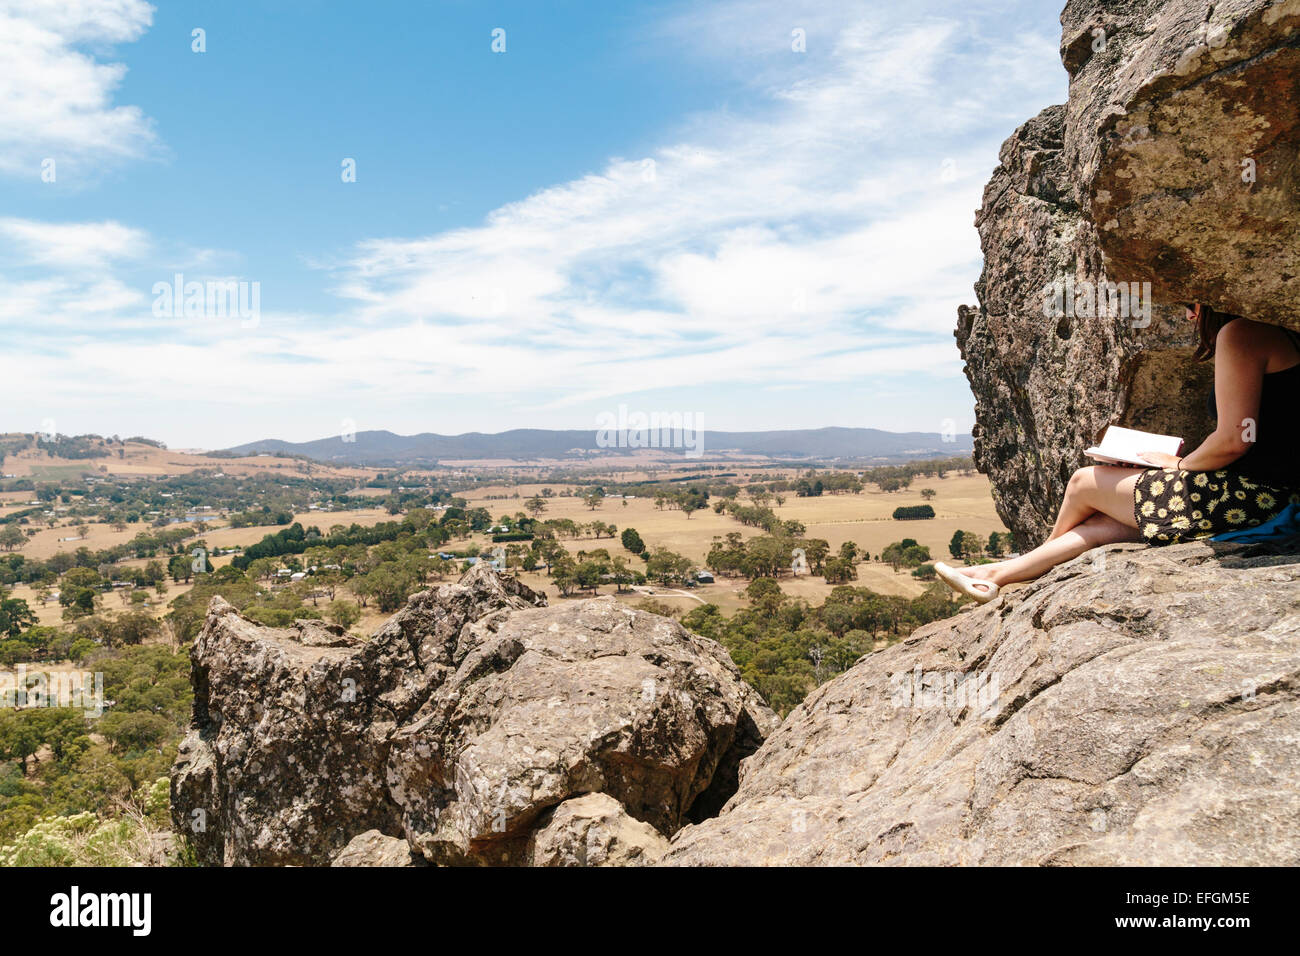 Young woman reading a book on rocky outcrop, Hanging Rock, Macedon Ranges, Victoria, Australia Stock Photo